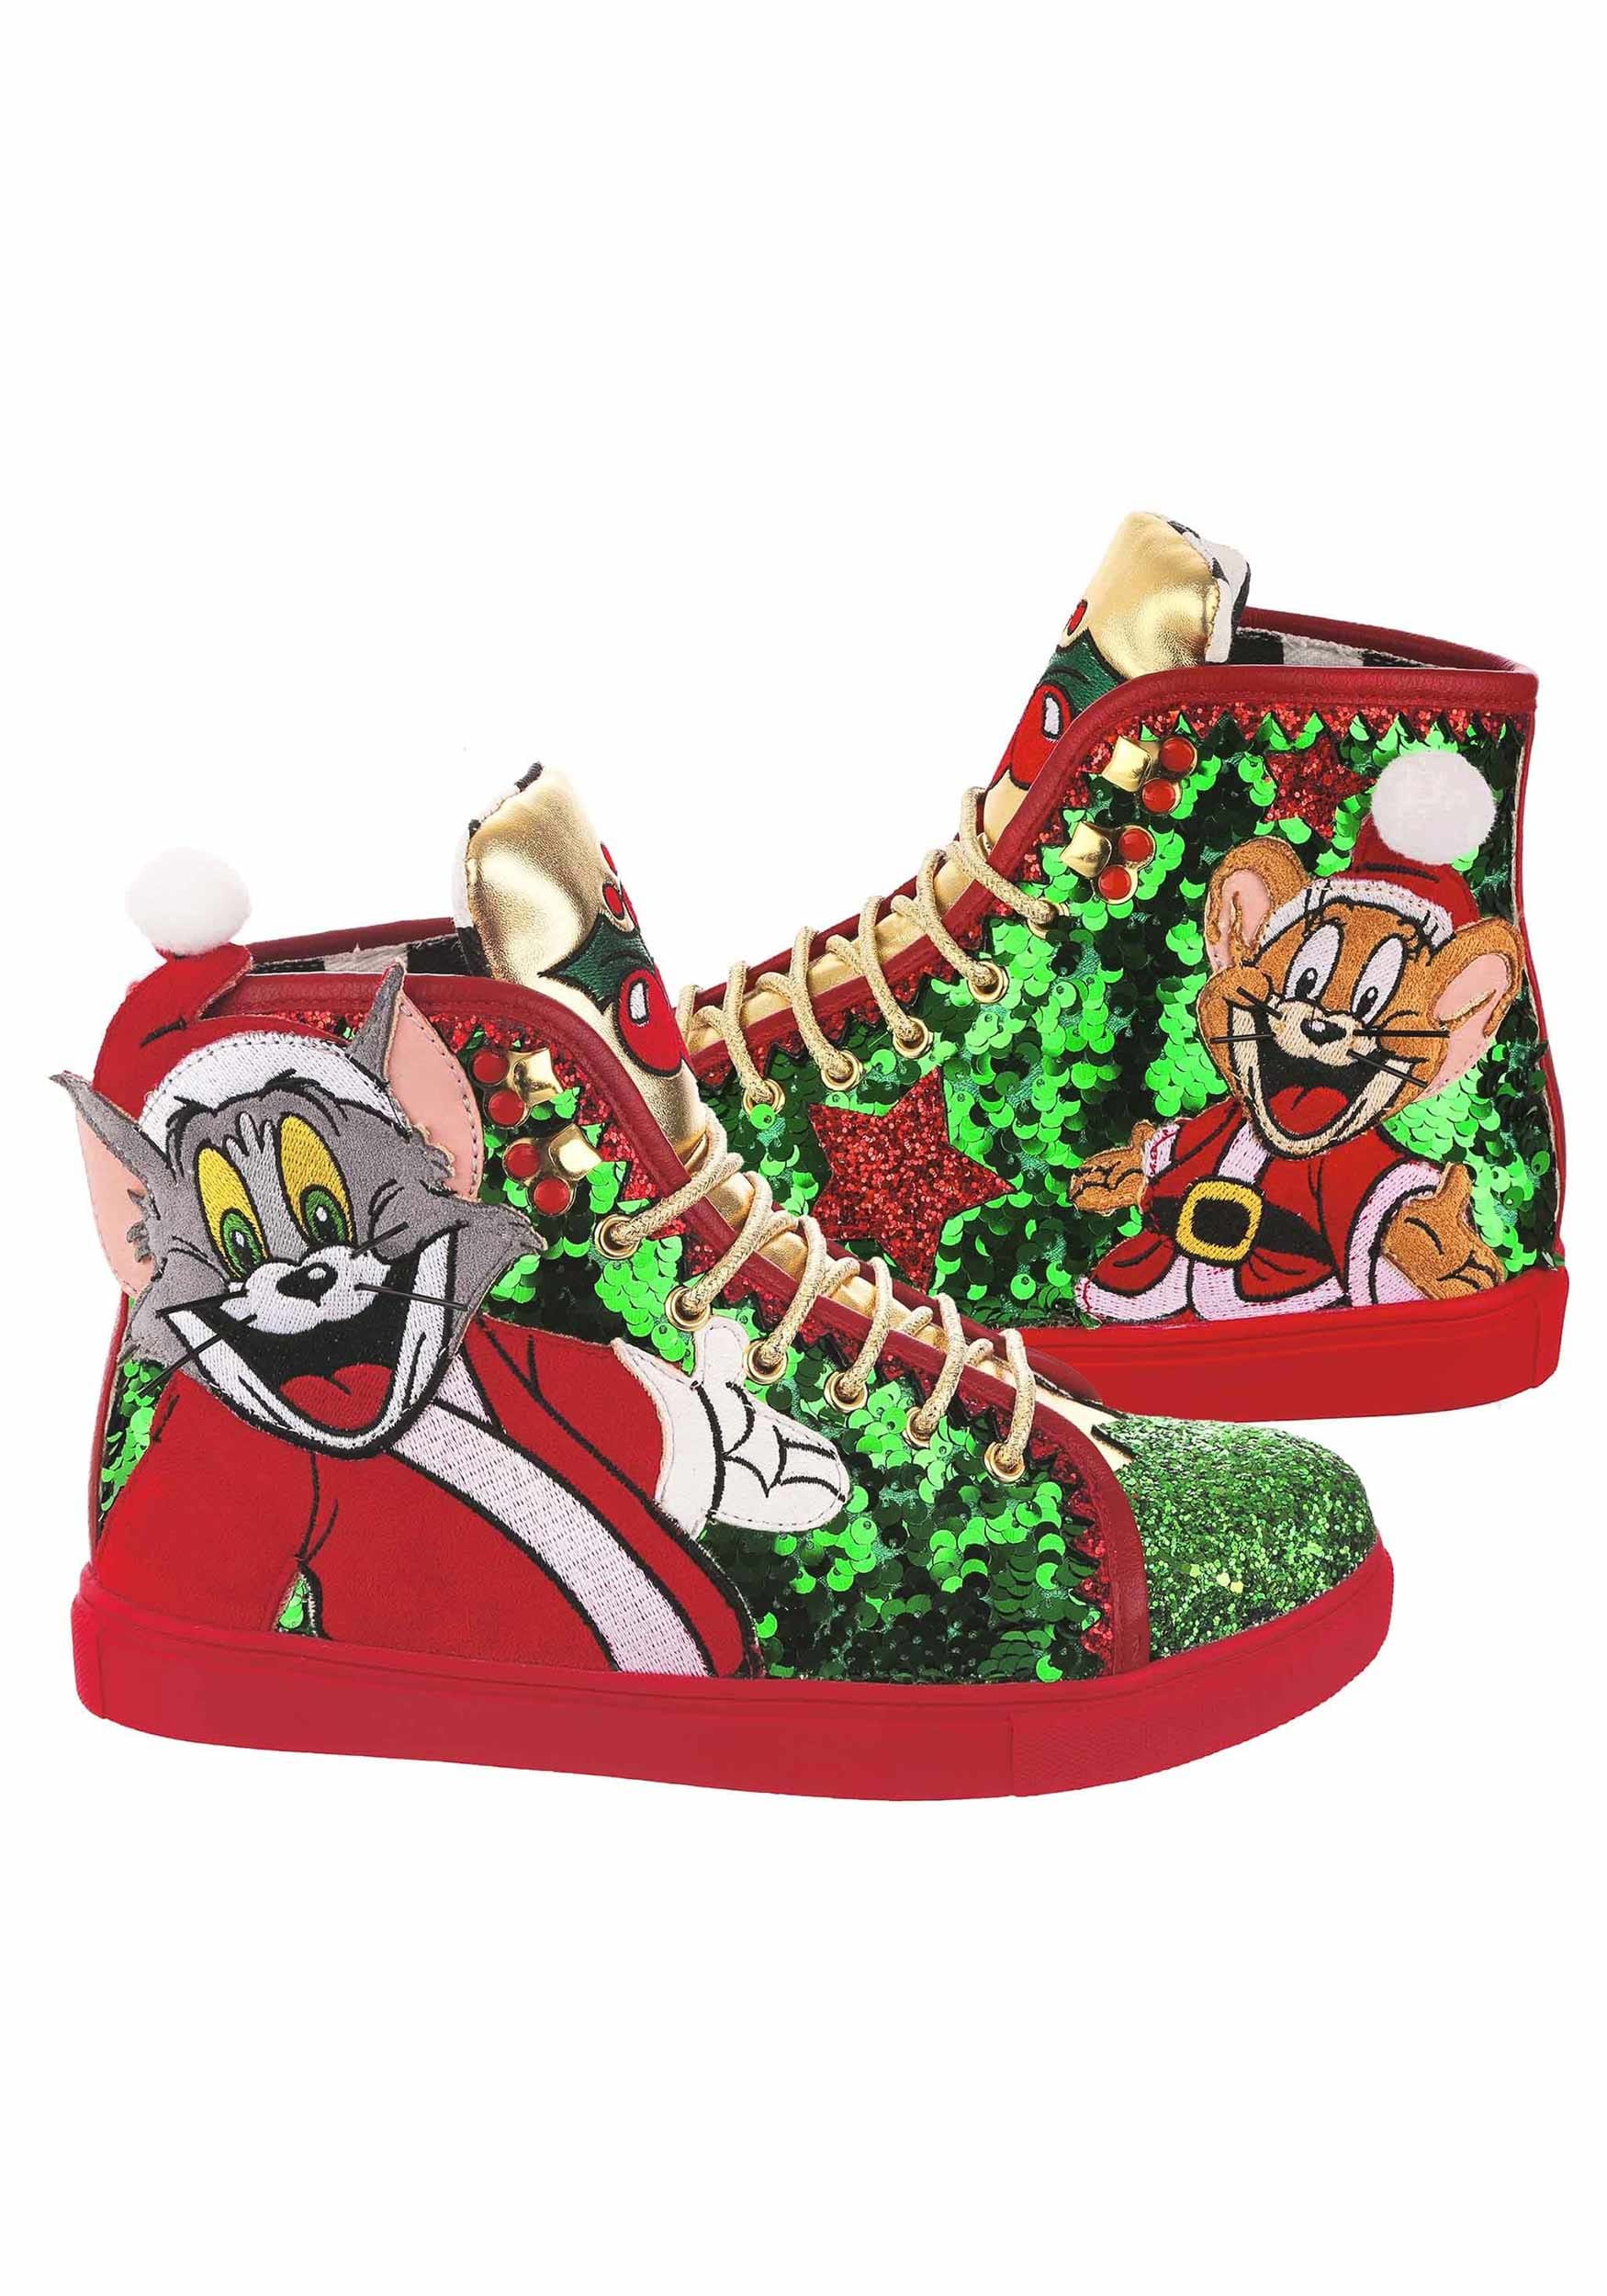 Image of Irregular Choice Tom and Jerry Christmas Crackers Sneakers by Irregular Choice